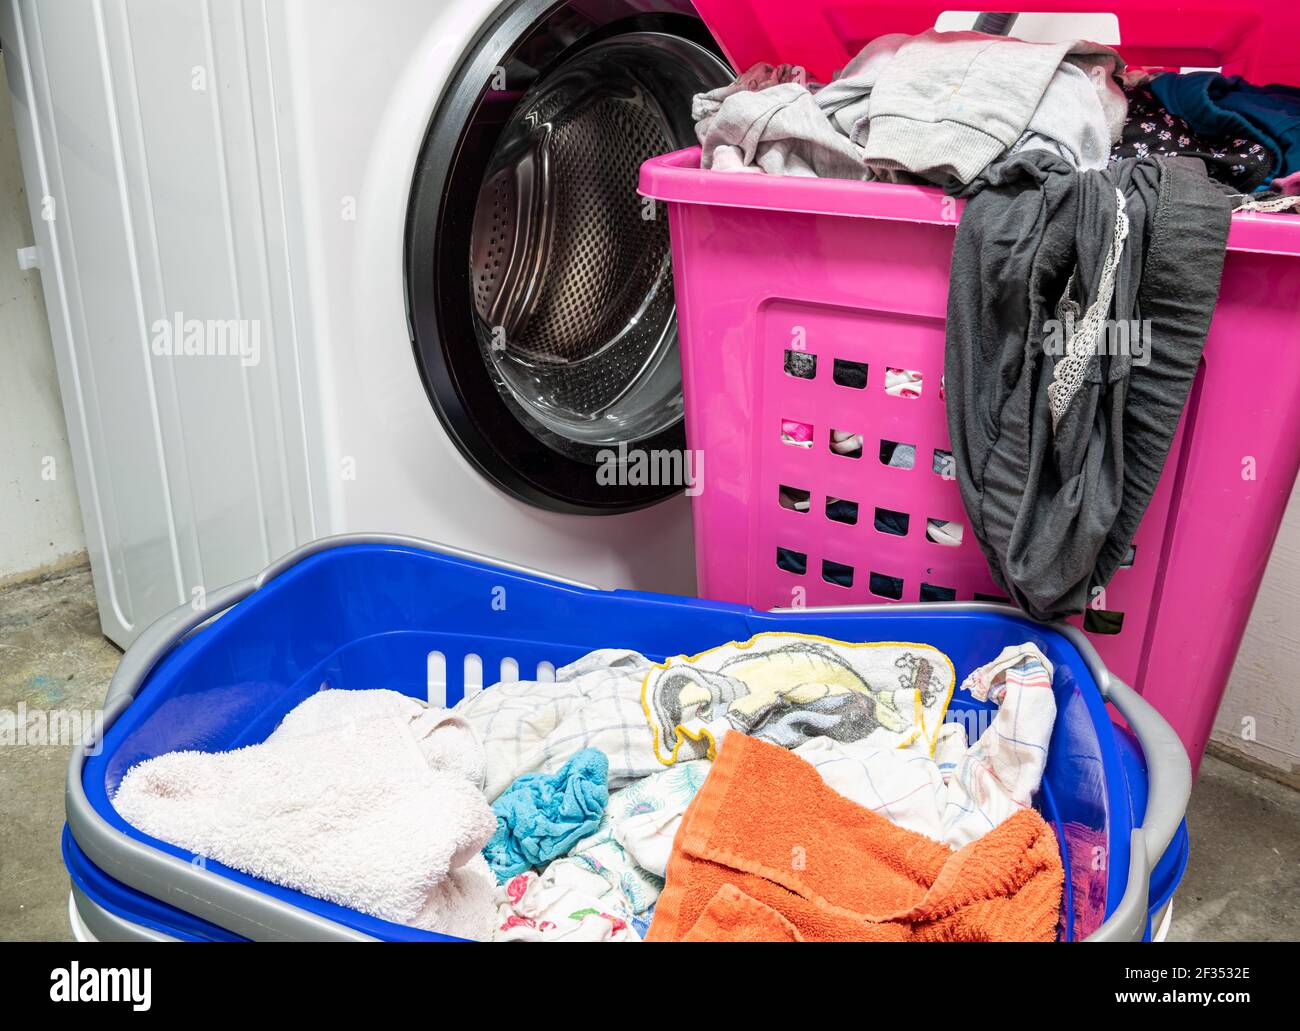 Laundry basket with dirty laundry and washing machine at home Stock Photo